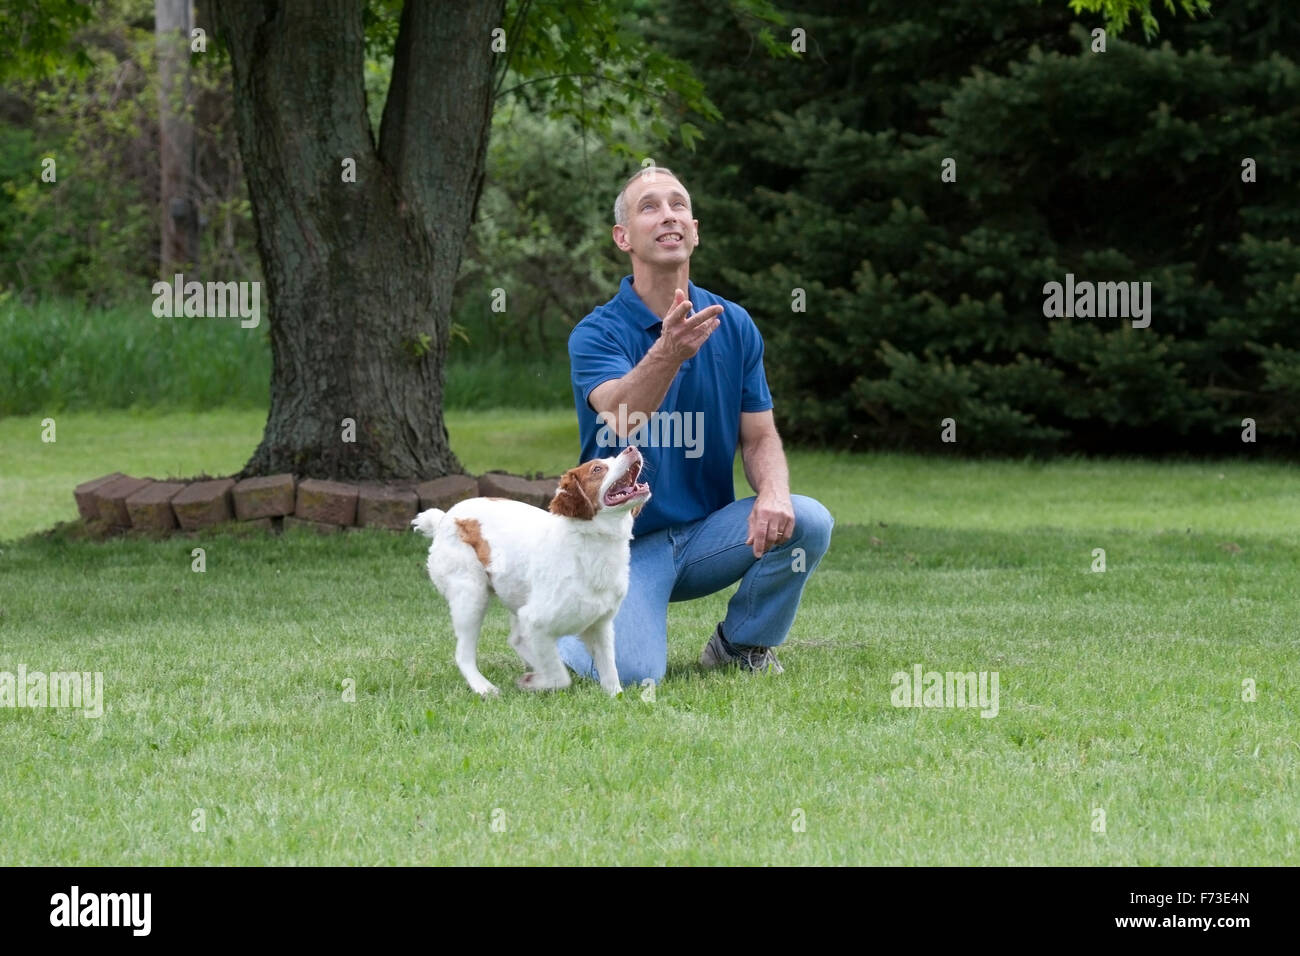 Man tosses ball for his pet dog, a Brittany spaniel Stock Photo